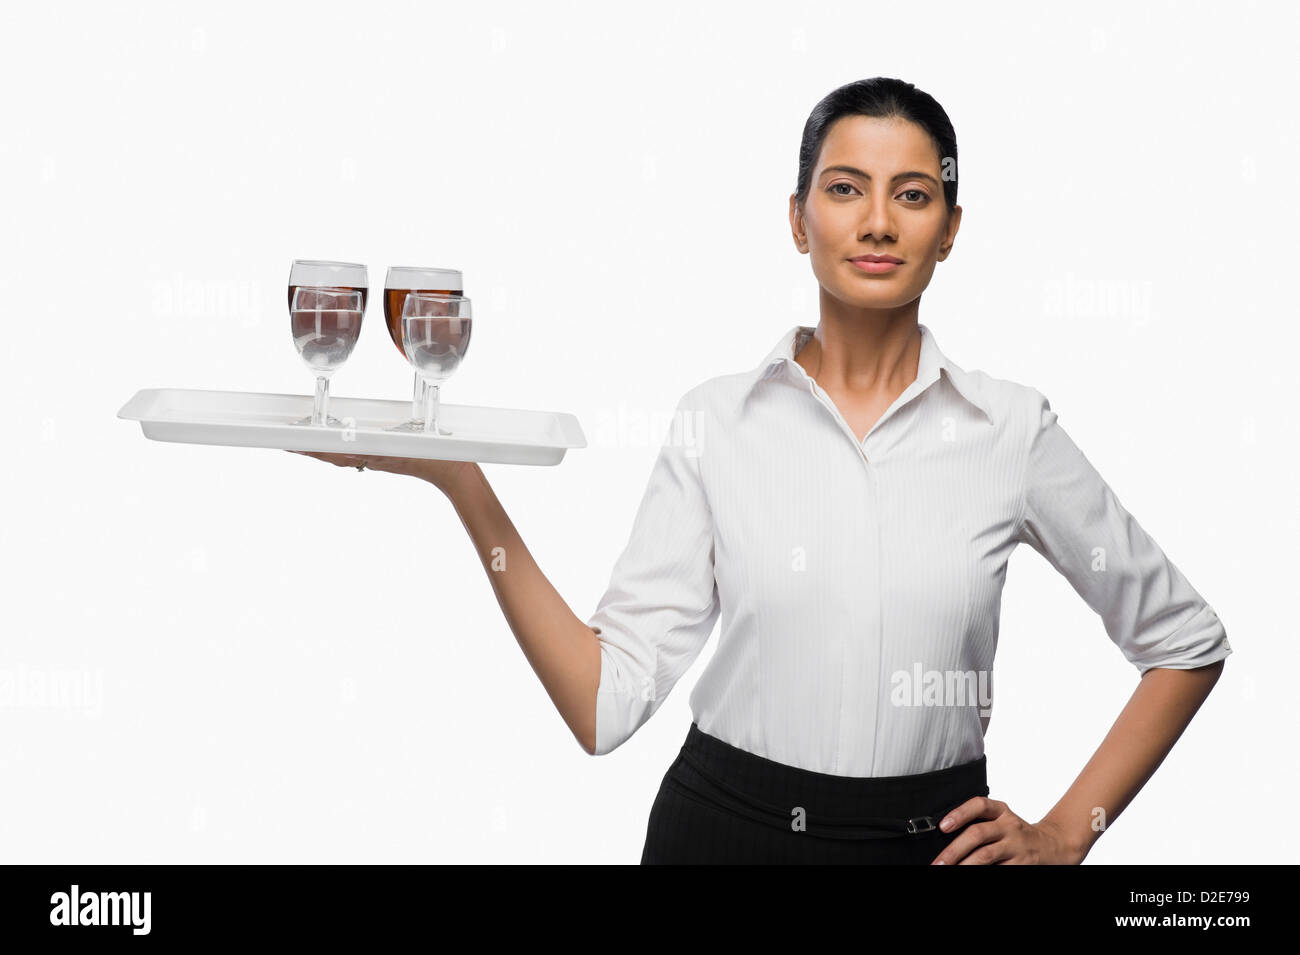 Air hostess carrying a tray of wine glasses Stock Photo